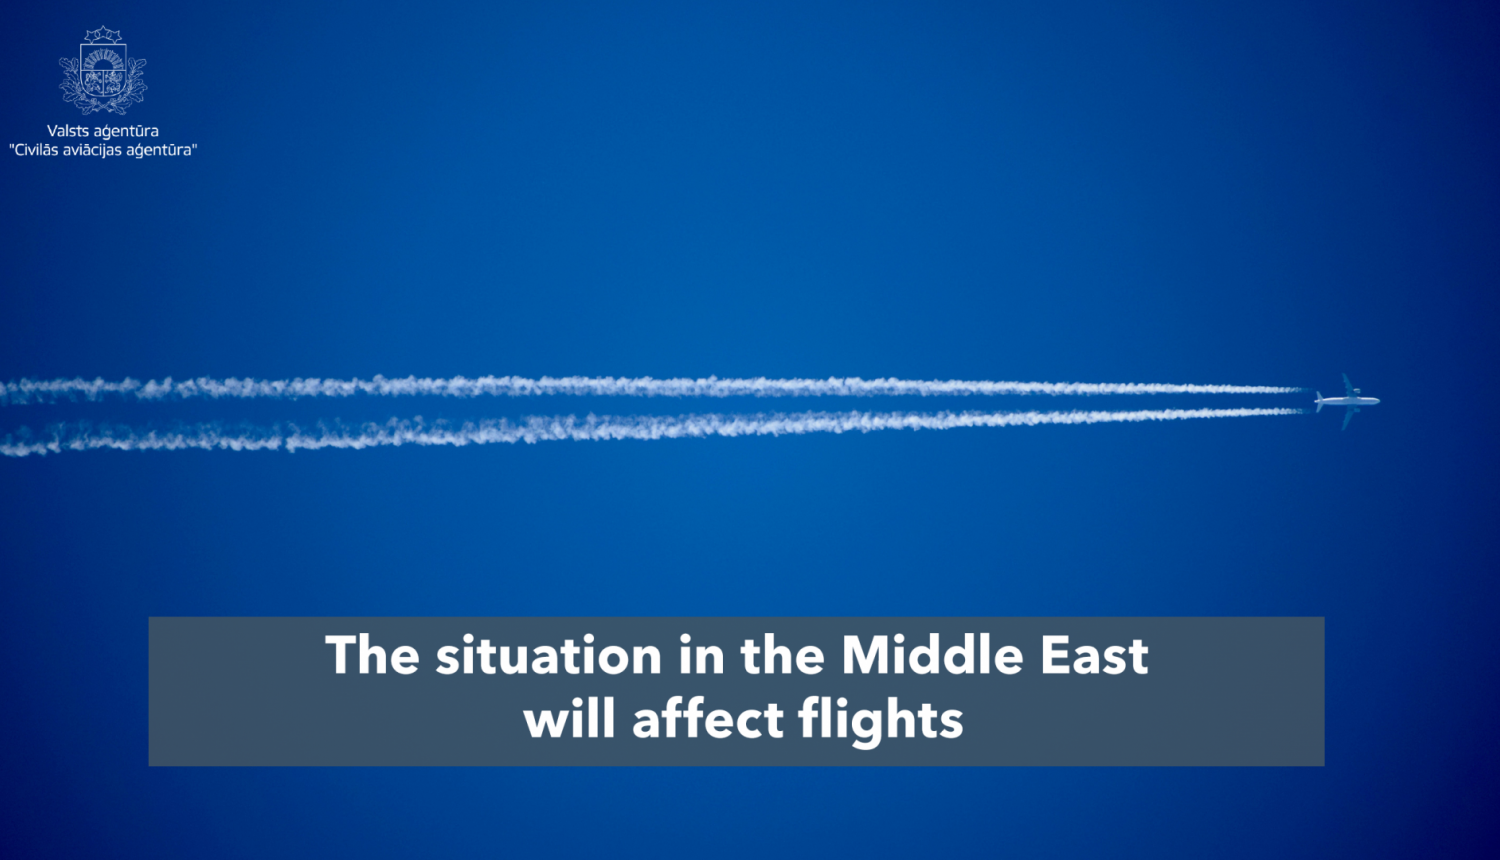 The situation in the Middle East will affect flights